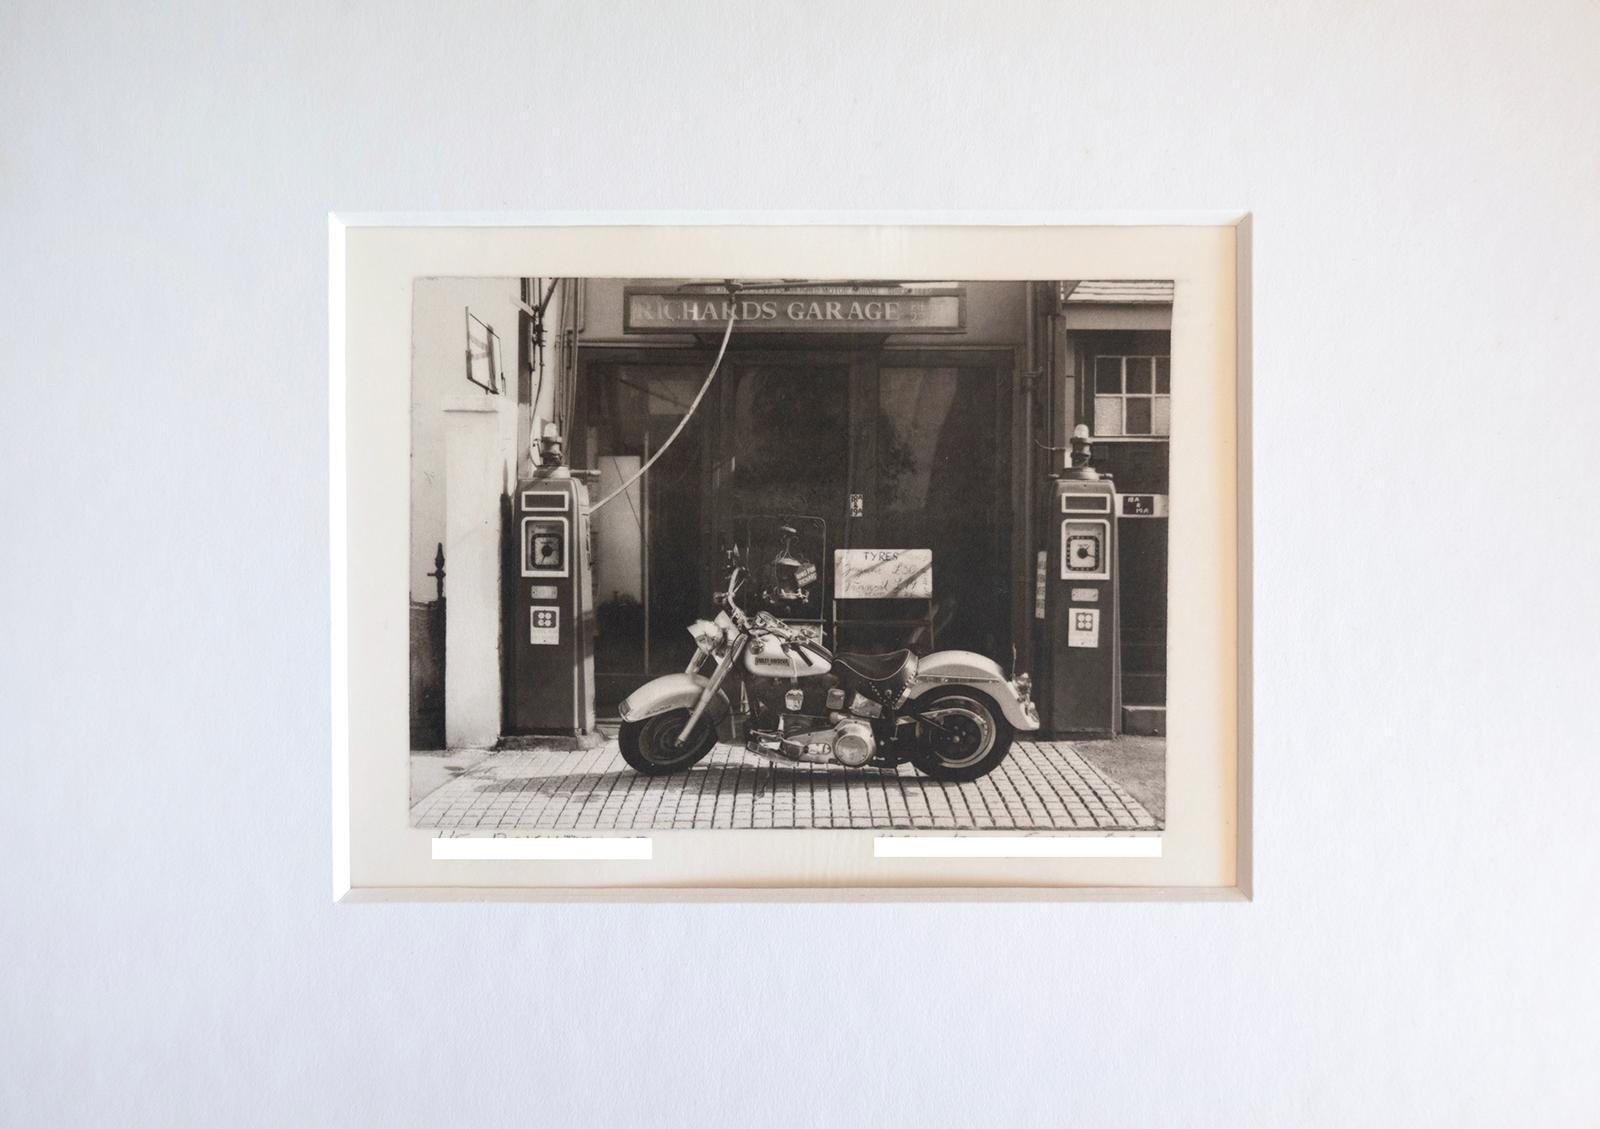 Brighton 27 -    Platinum Palladium print over silver on vellum paper - Edition 1 of 8 , plus 2 AP ( size 1 )
An old Harley Davidson motorcycle in front of a gas station garage in Brighton, UK, in 1984.

Signed + numbered with certificate of